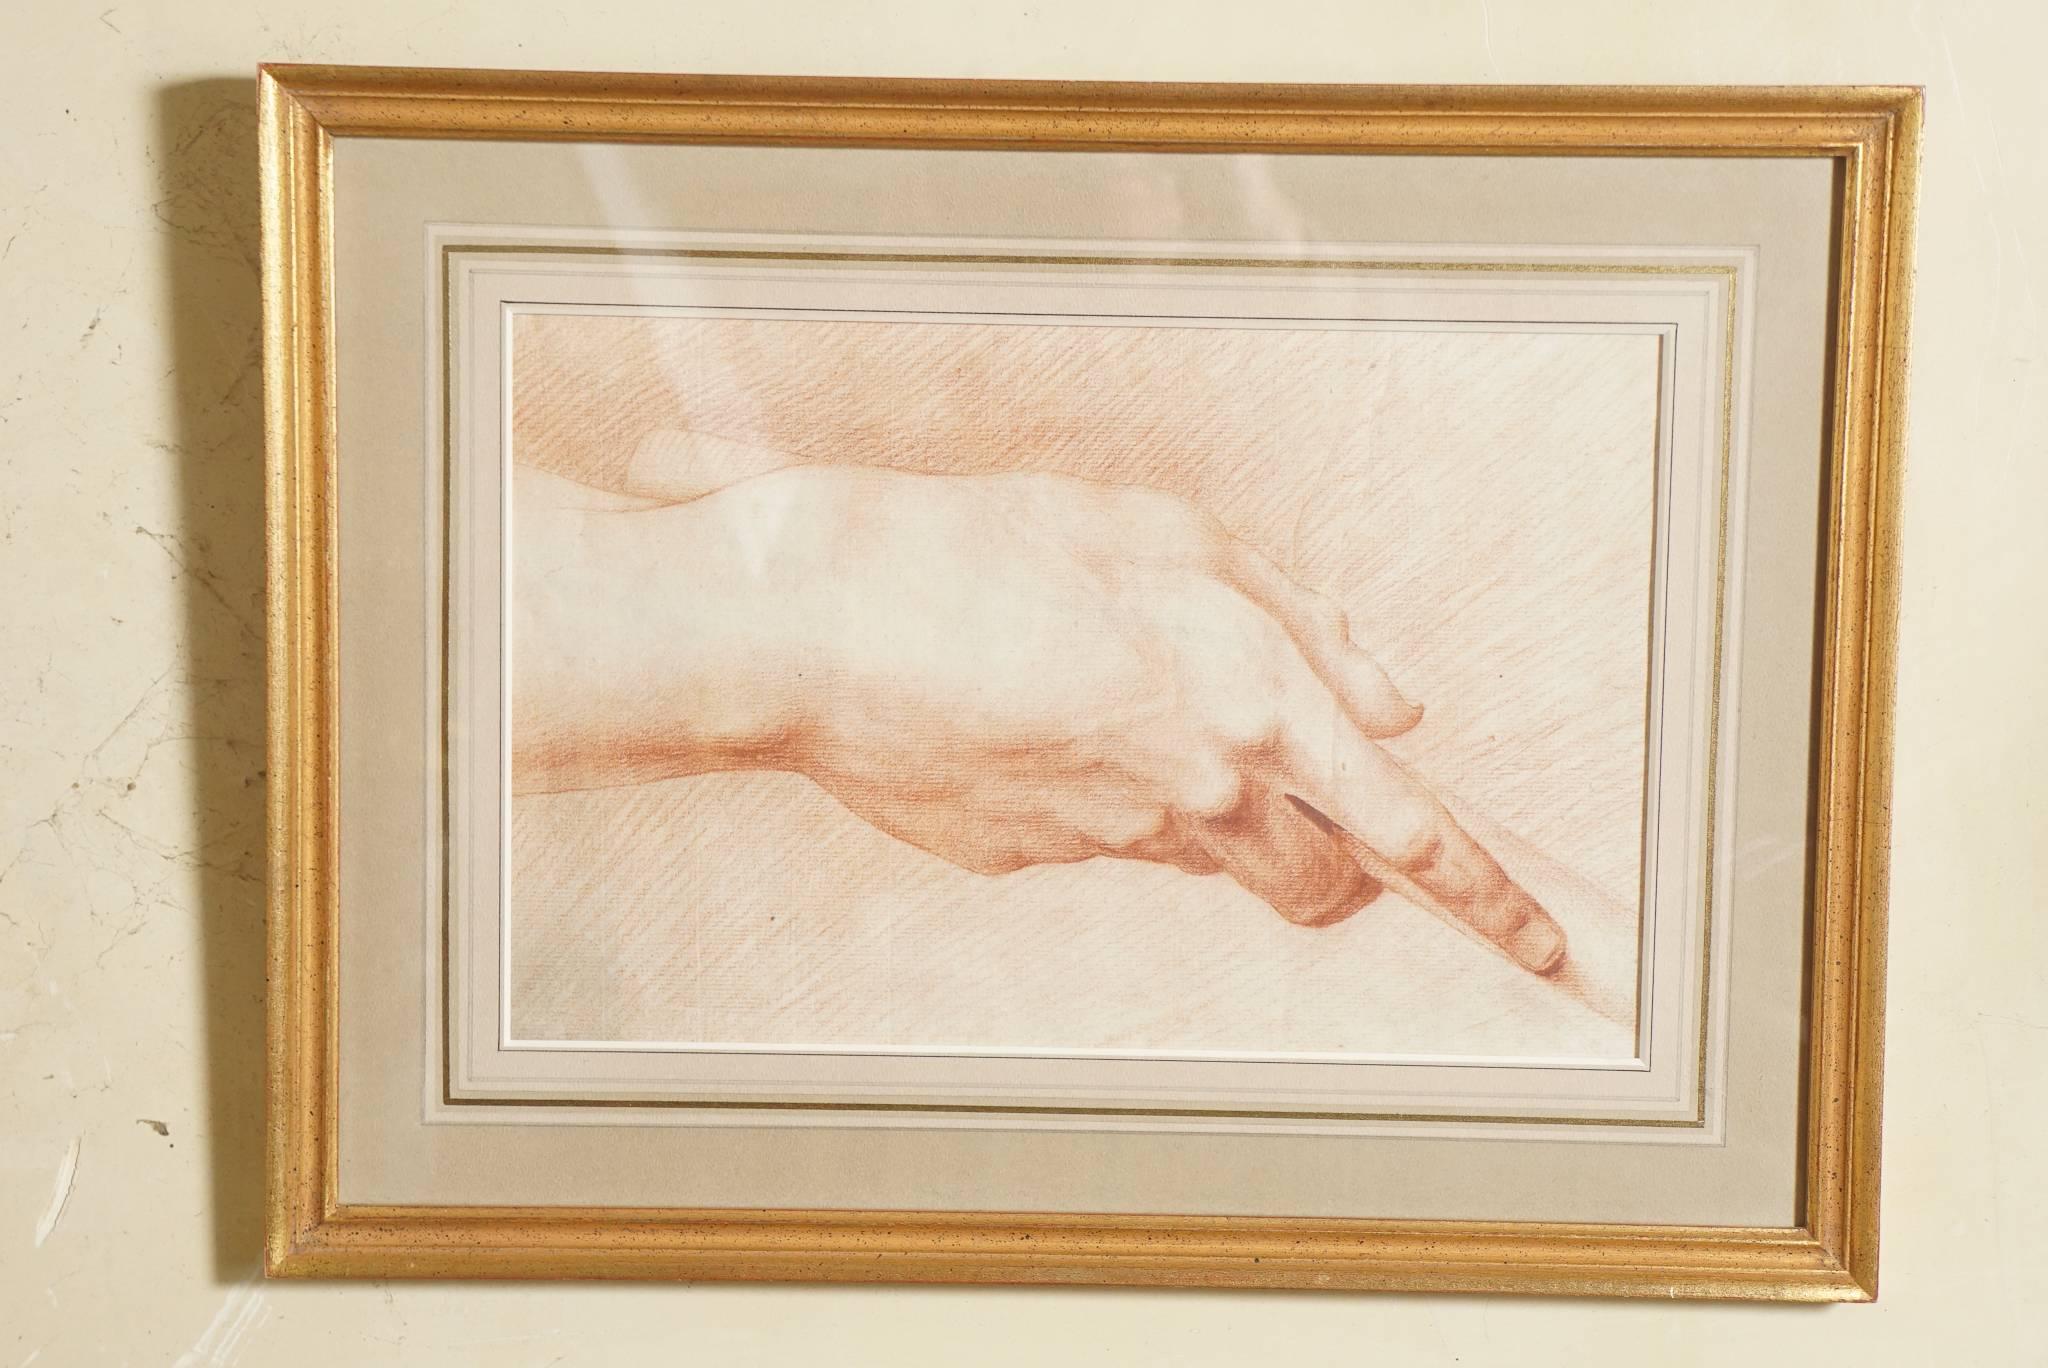 This very fine drawing in Sanguine is from the early 19th century. Made as a preparatory sketch concerning composition, musculature and shadow this work is unsigned but we have four drawings by the same hand purchased from a single owner sale.